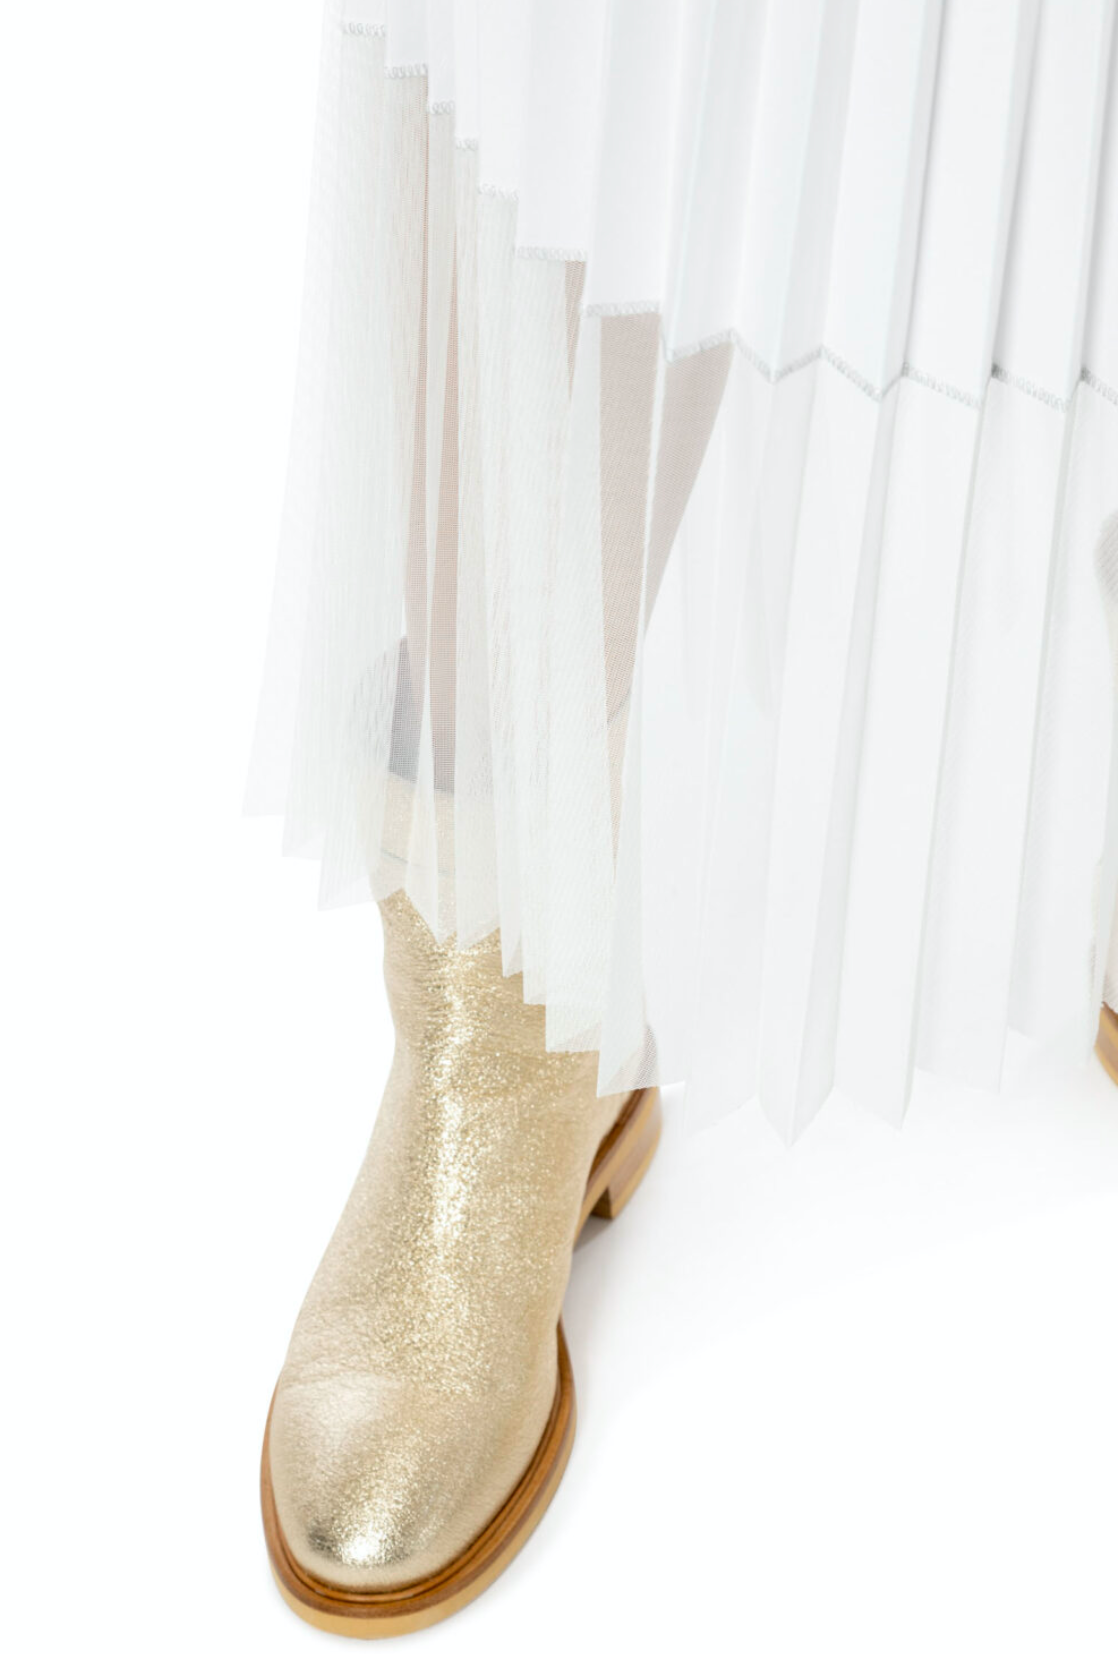 Cream Pleated Maxi Skirt With Elasticated Waist Band & Gold & Silver Stitch Detailing